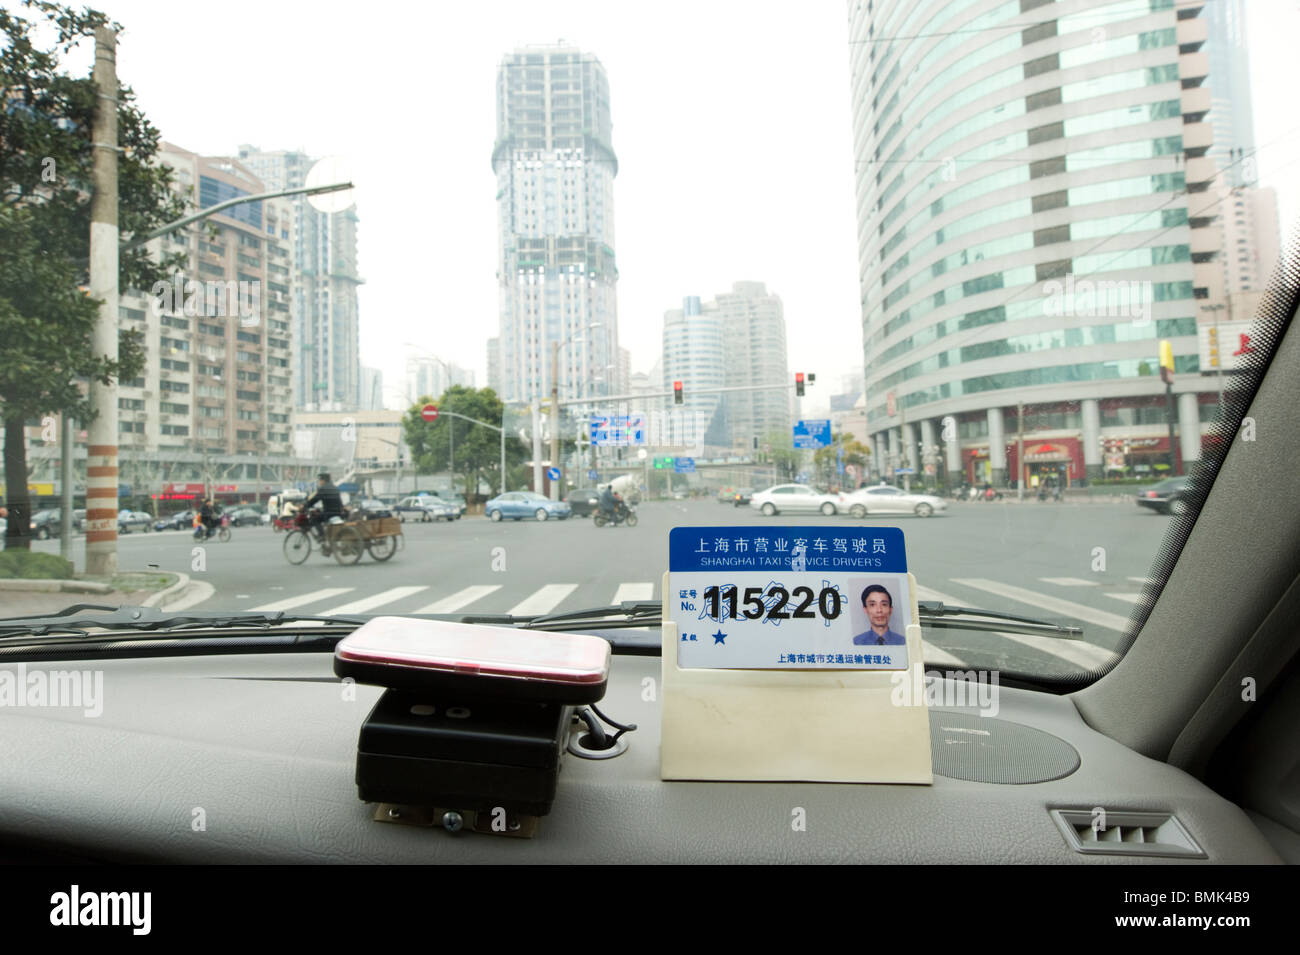 Taxi driver's id badge and number, Shanghai, China Stock Photo